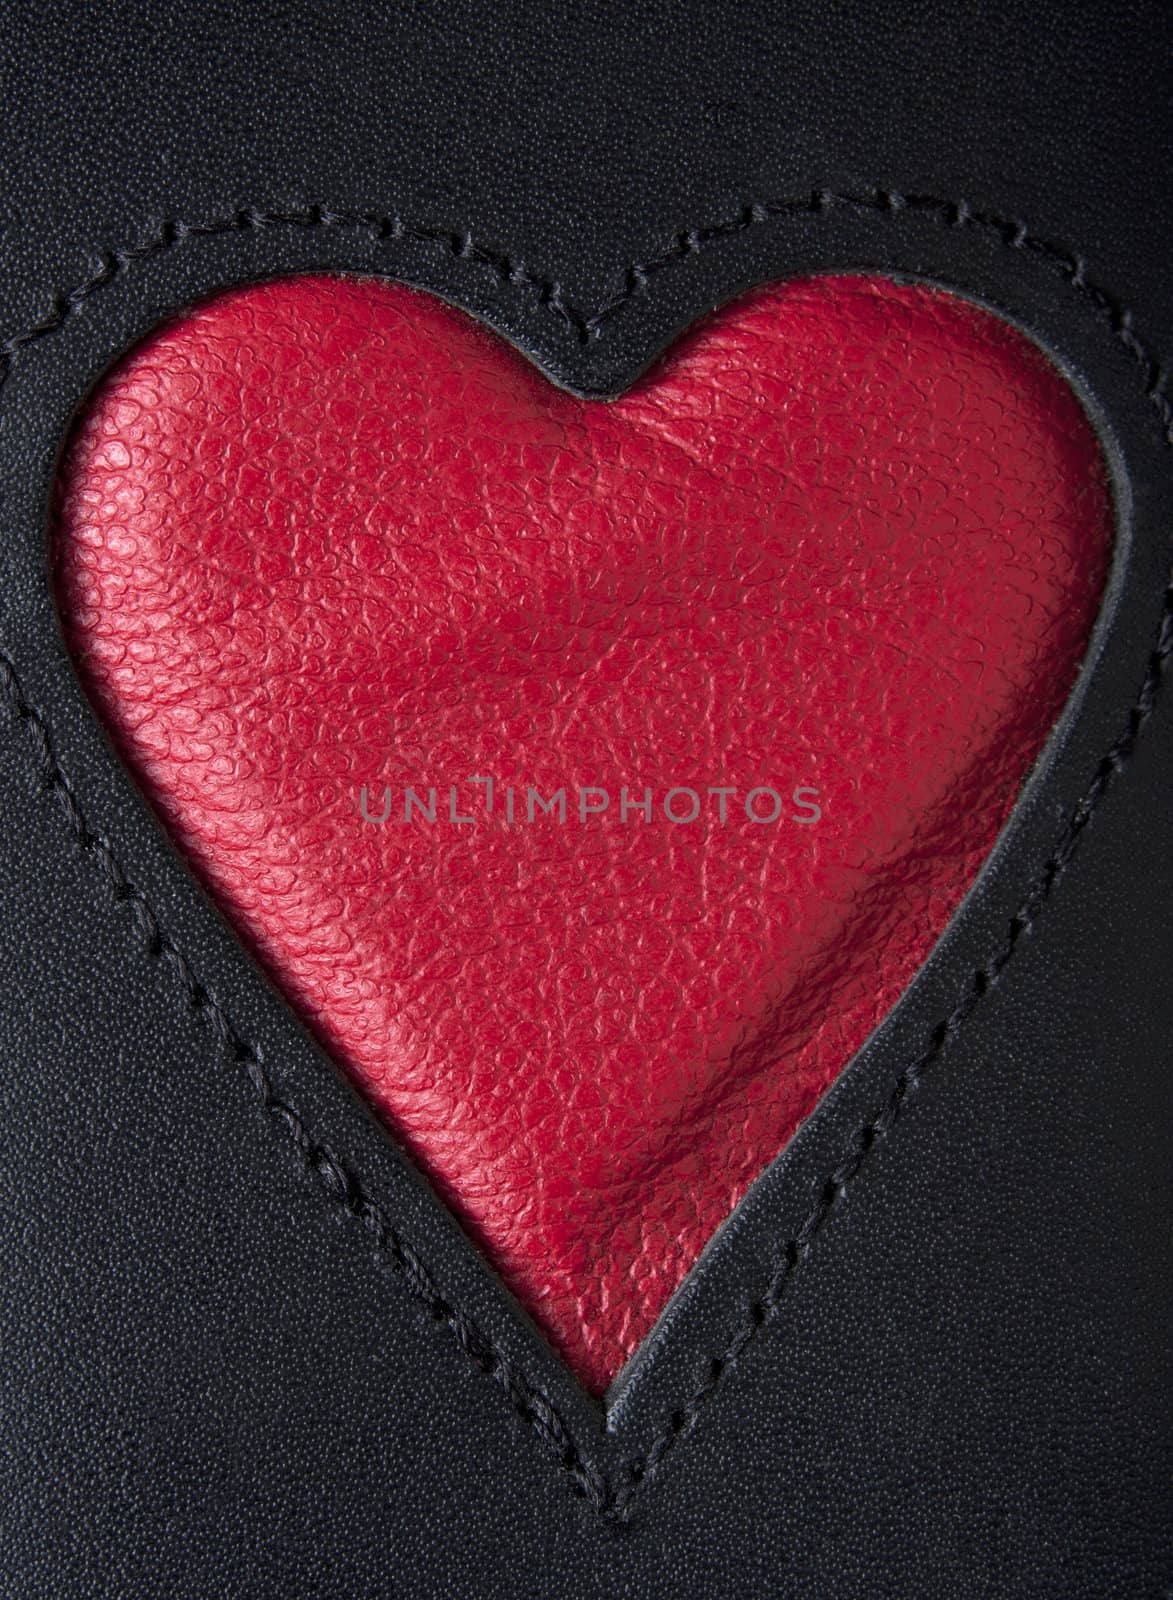 Leather heart symbol red on black stiched